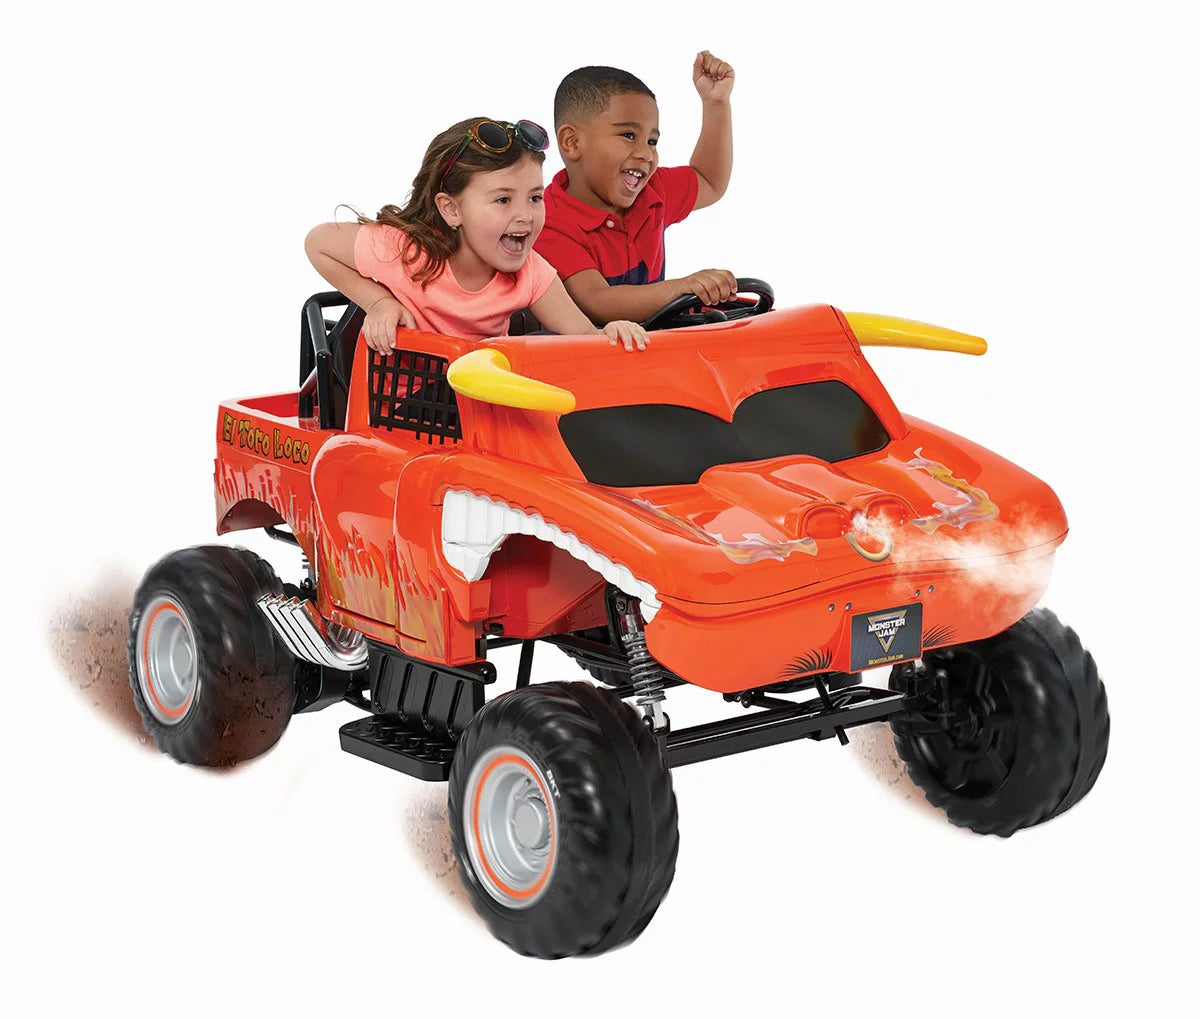 Monster Jam 24 Volt El Toro Loco Monster Truck that Blows Smoke! For Boys & Girls Ages 3 and up